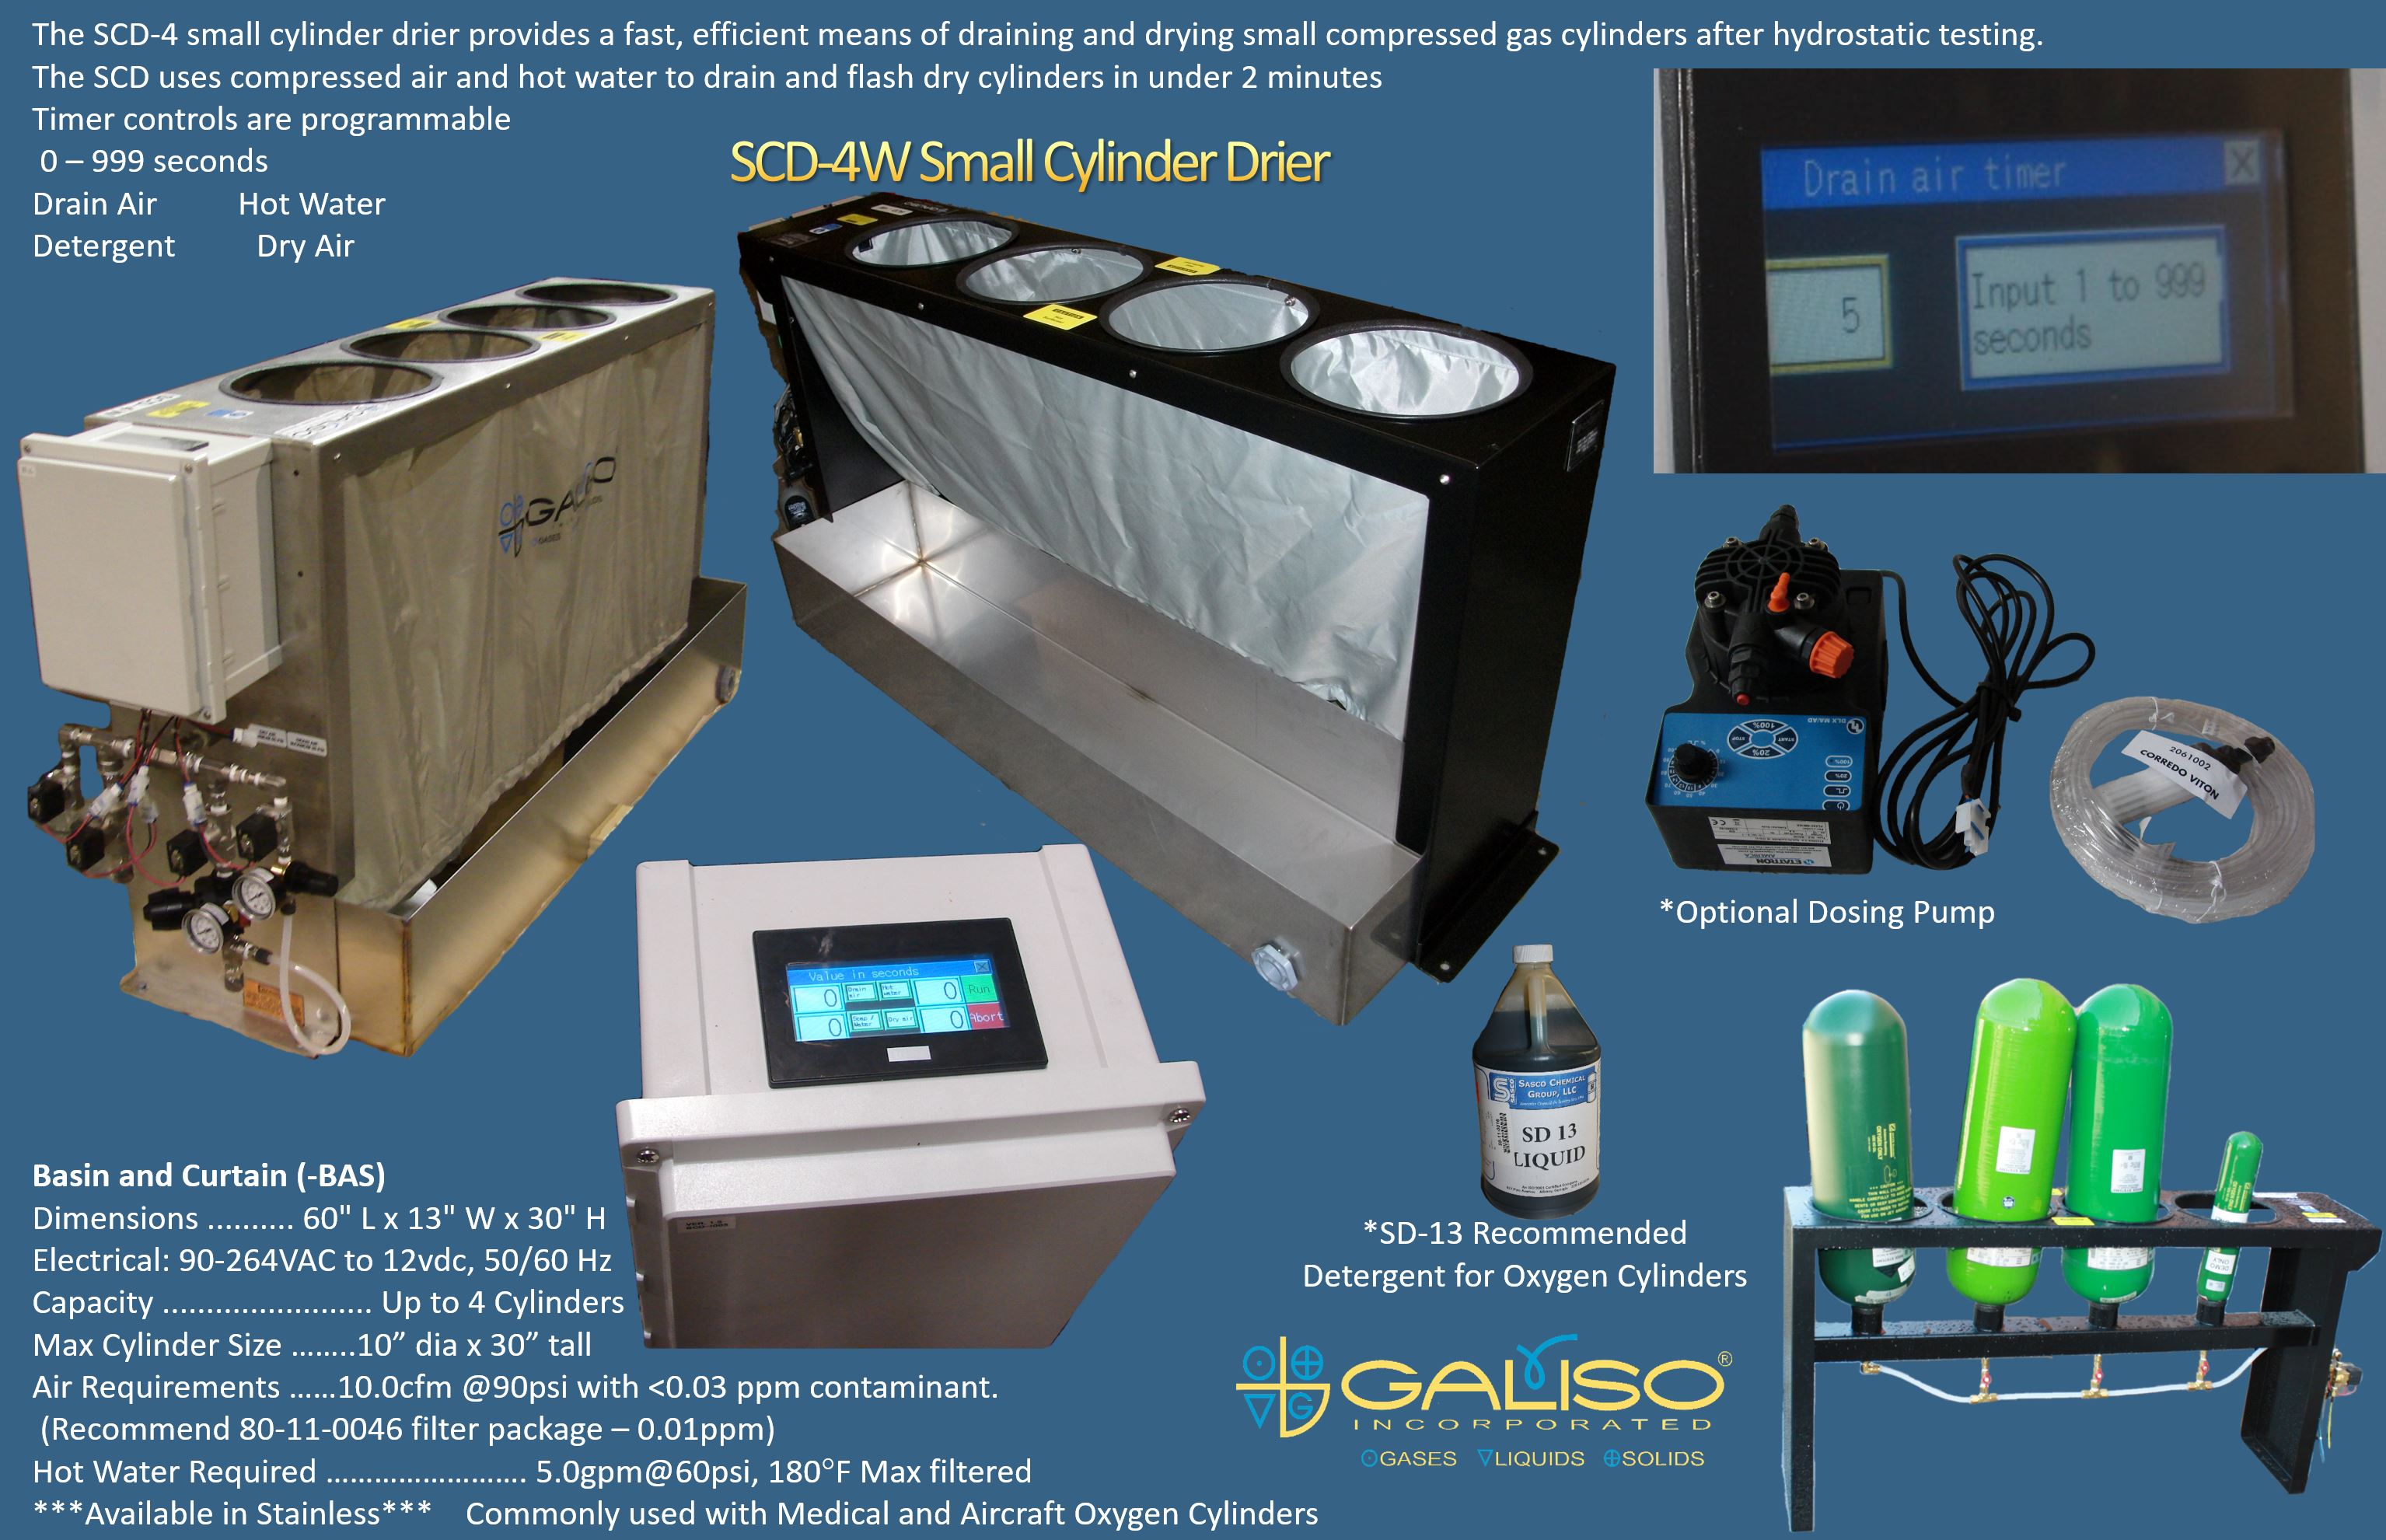 Galiso Small Cylinder Dryer for Hydrostatic Test Systems